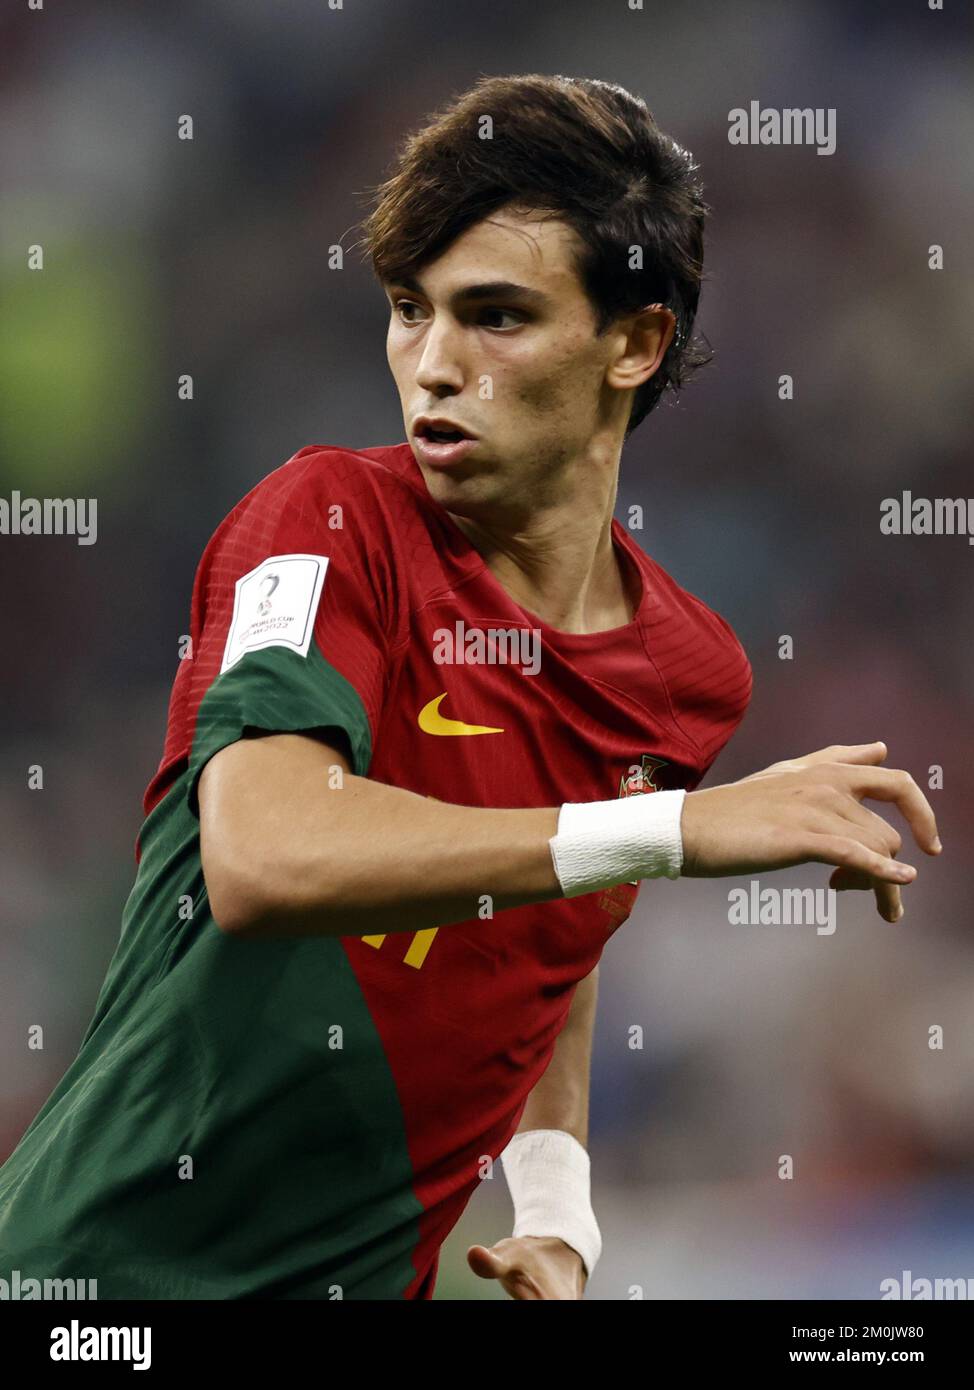 AL DAAYEN - Joao Felix of Portugal during the FIFA World Cup Qatar 2022 round of 16 match between Portugal and Switzerland at Lusail Stadium on December 6, 2022 in Al Daayen, Qatar. AP | Dutch Height | MAURICE OF STONE Stock Photo